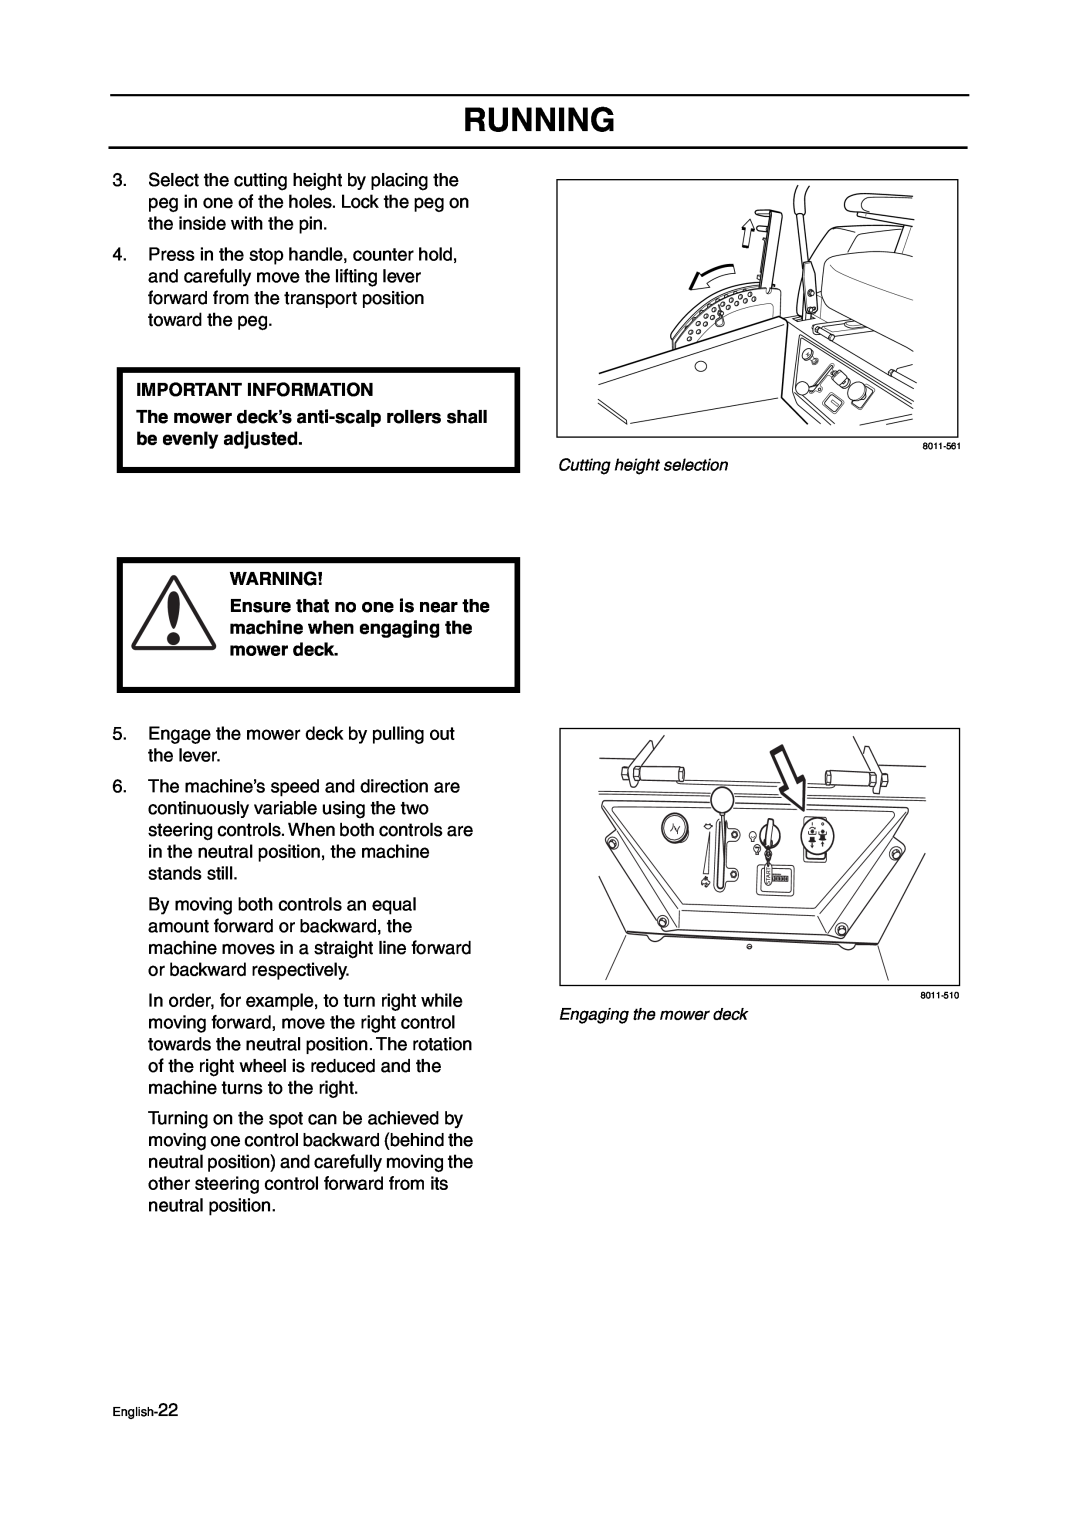 Husqvarna ZTH manual The mower deck’s anti-scalp rollers shall be evenly adjusted, Running, Important Information 